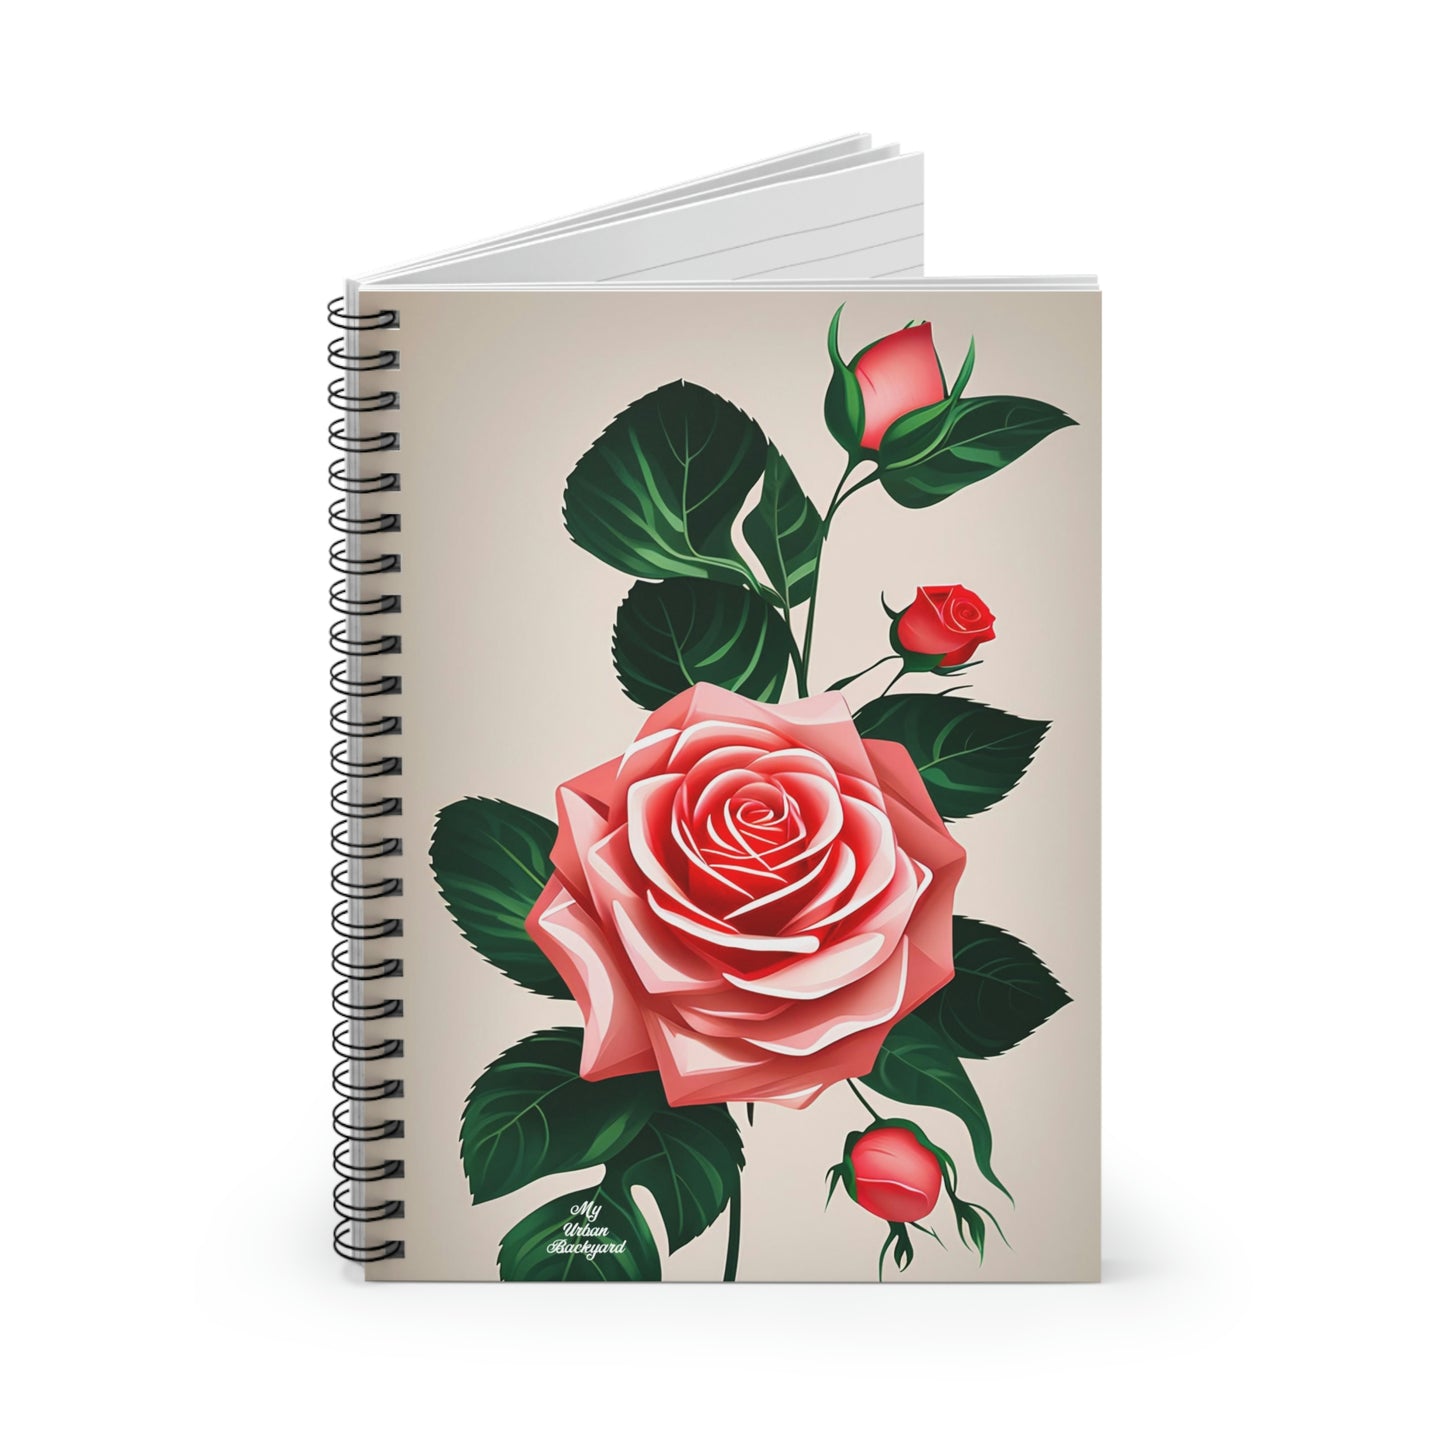 Spiral Notebook Writing Journal with 118 ruled line pages - Pink Rose Flowers